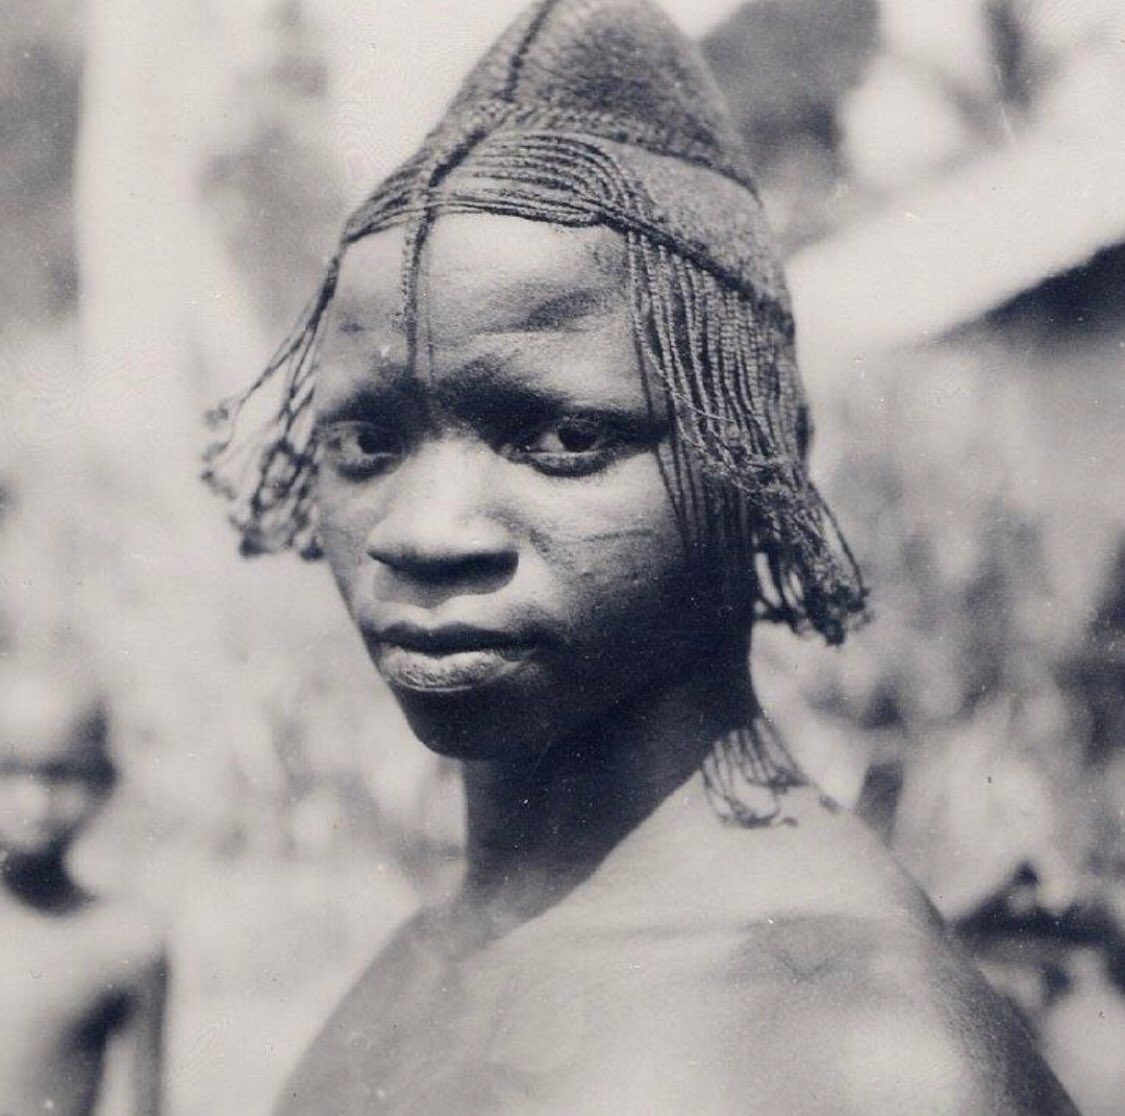 A young Igbo man with plaited hairstyle and uli body and face painting. Photographed by J. Stocker, early 20th century.